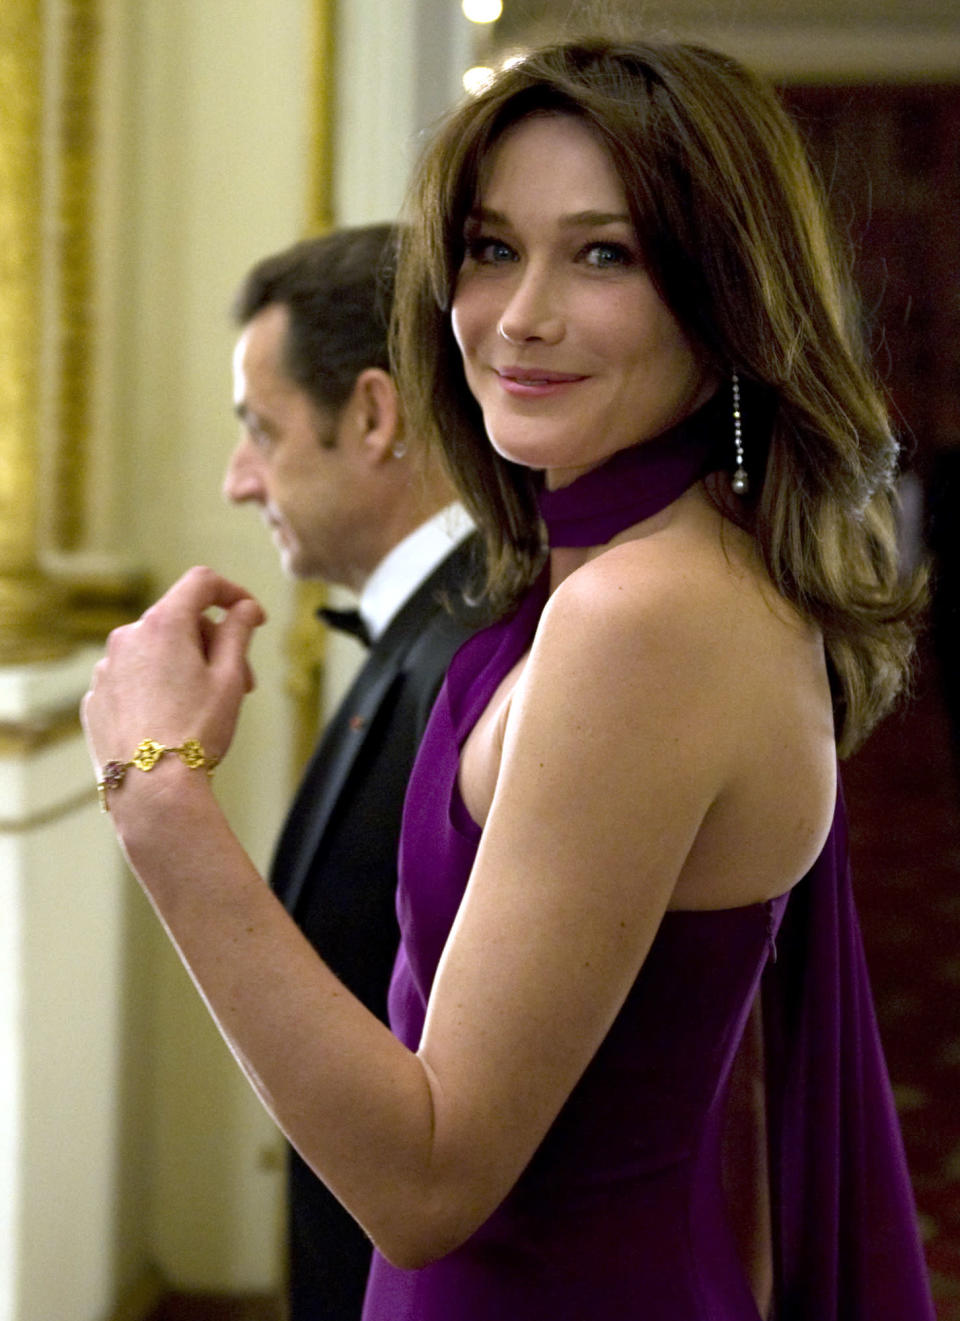 <b>Carla Bruni-Sarkozy, France</b> Okay, she wasn't born a royal, but Carla Bruni-Sarkozy is too hot to leave out. The wife of French President Nikolas Sarkozy, Carla used to be a popular pop star and model in Italy. That President is one lucky man!